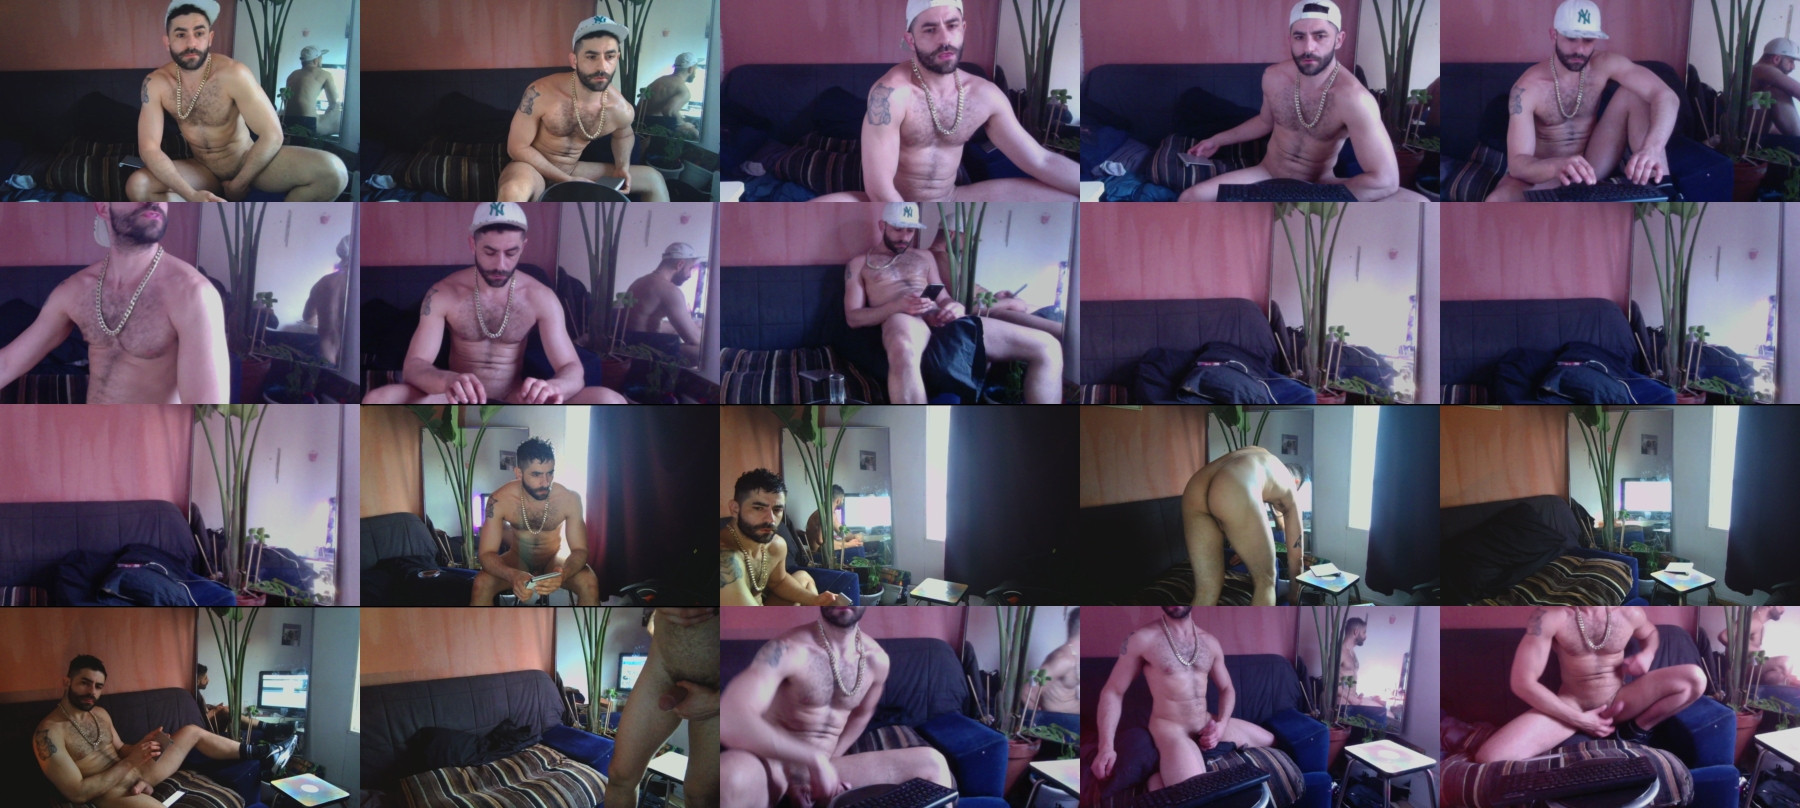 kinkybcn  06-05-2021 Recorded Video Download